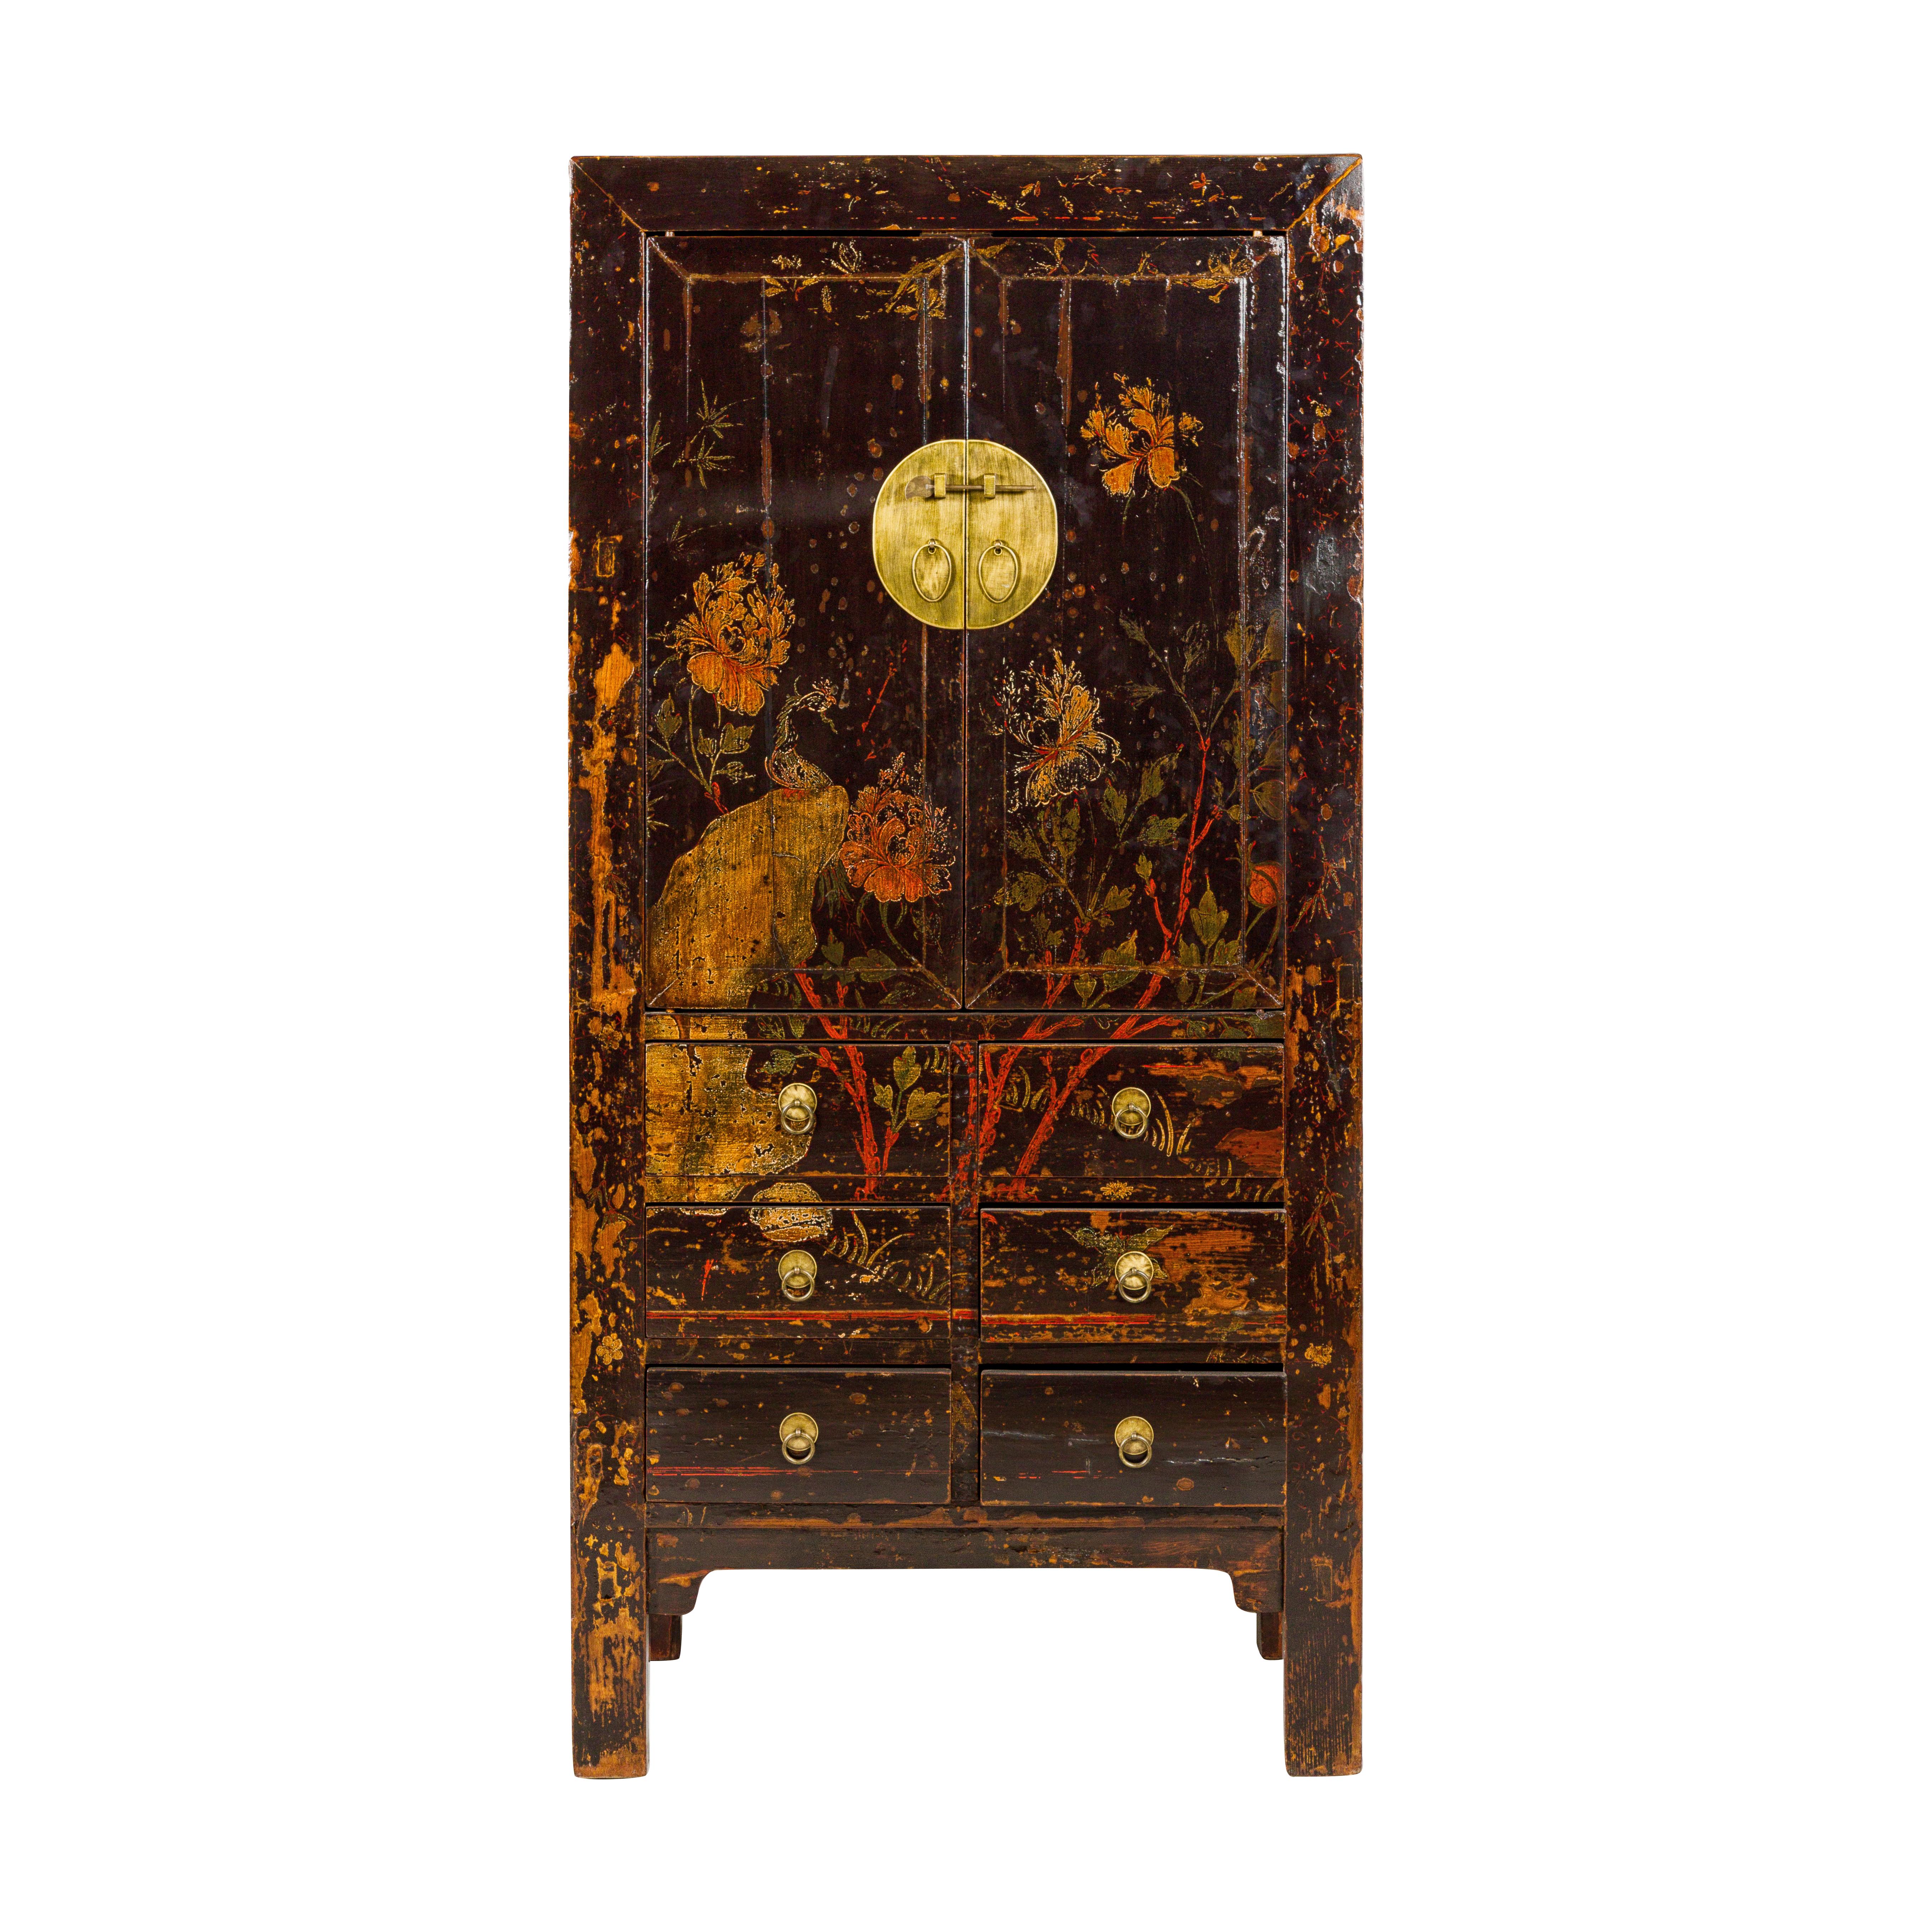 Qing Dynasty Hand-Painted Cabinet with Floral Décor, Doors and Drawers For Sale 10